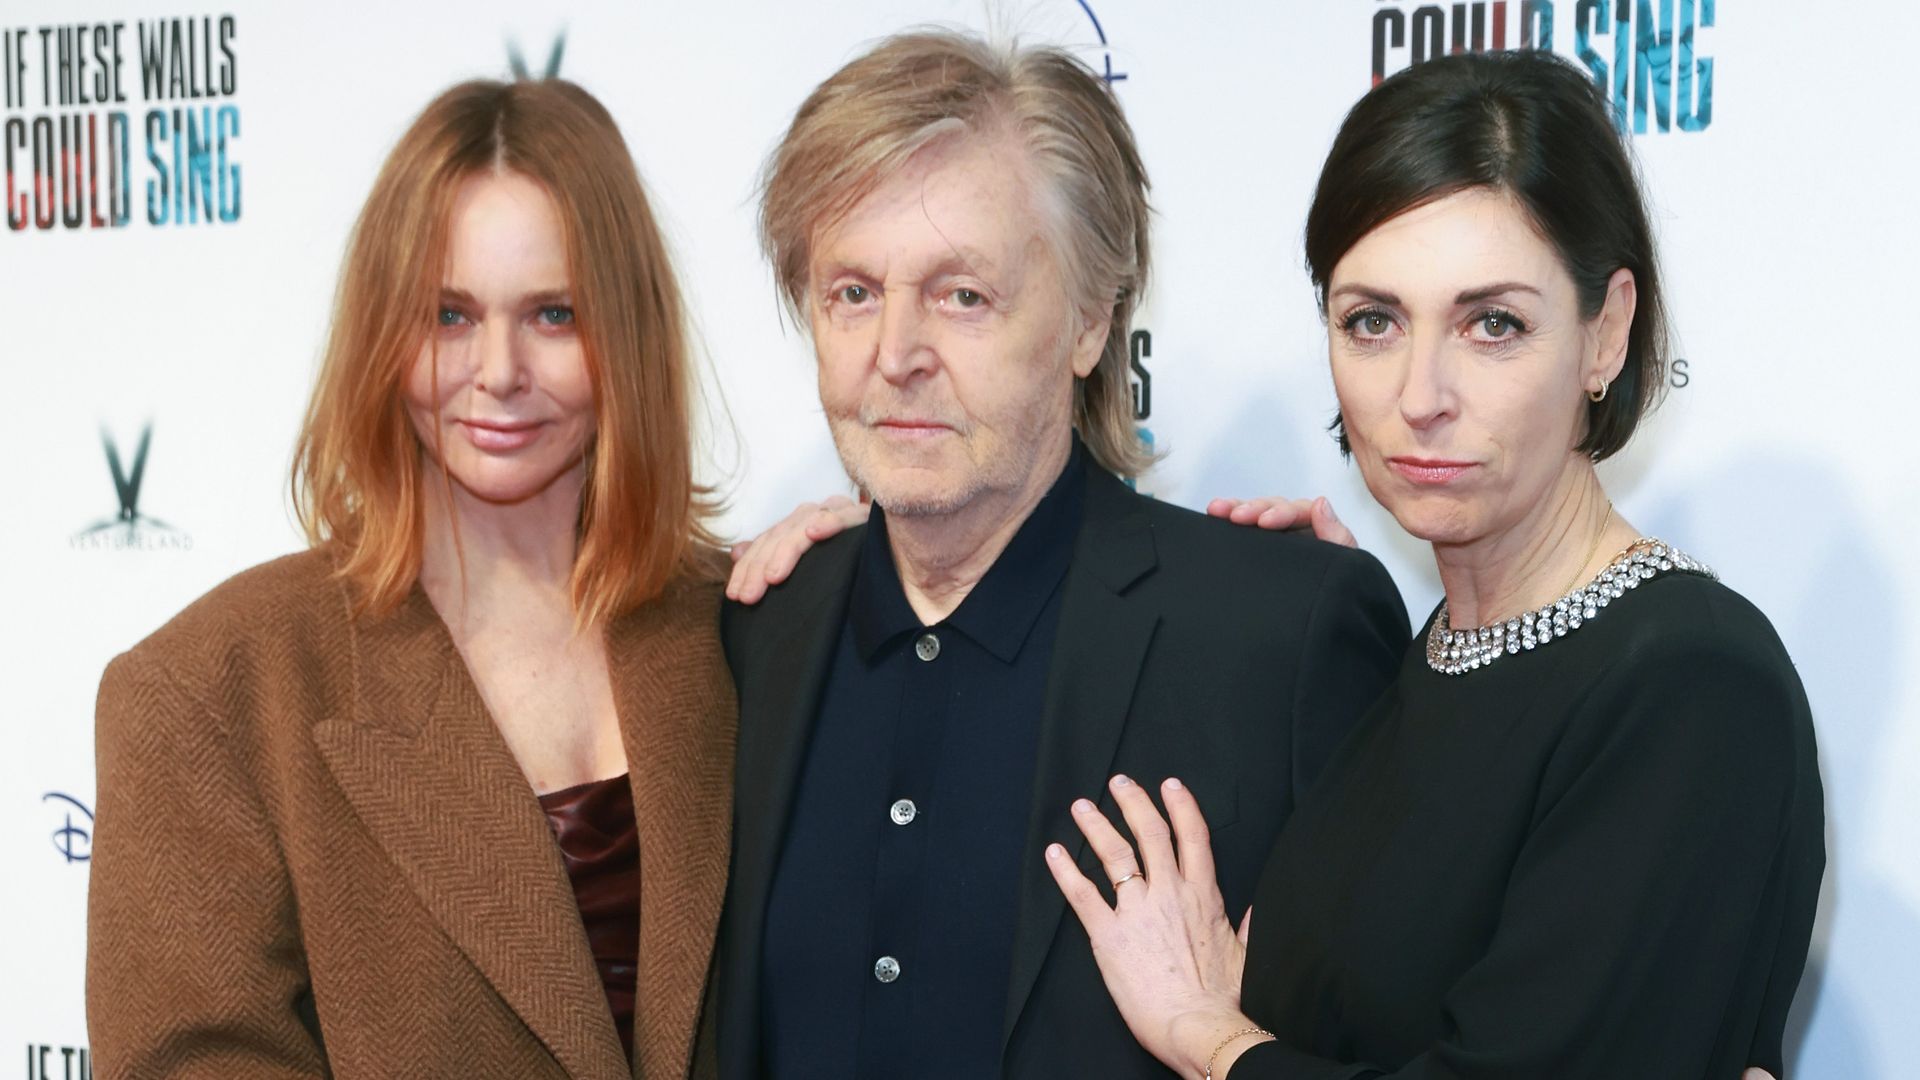 Proud Paul McCartney enjoys special reunion with daughters Stella and Mary